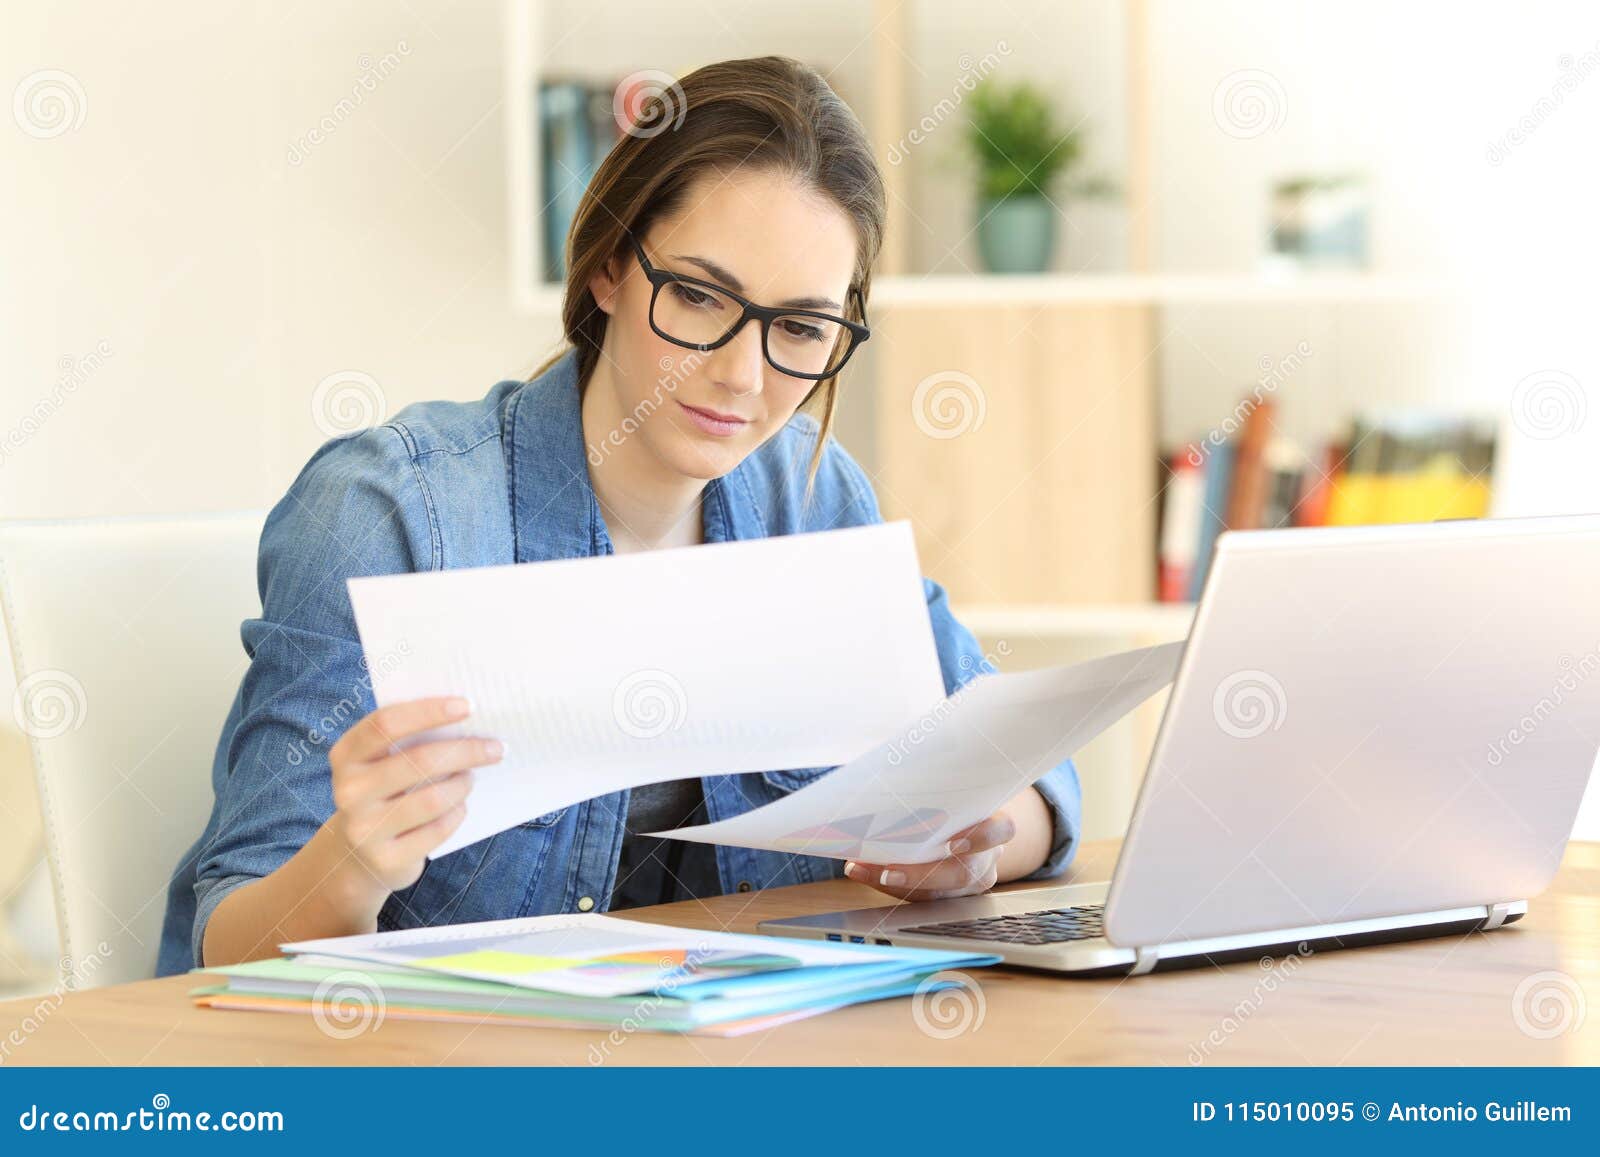 self employed working comparing documents at home